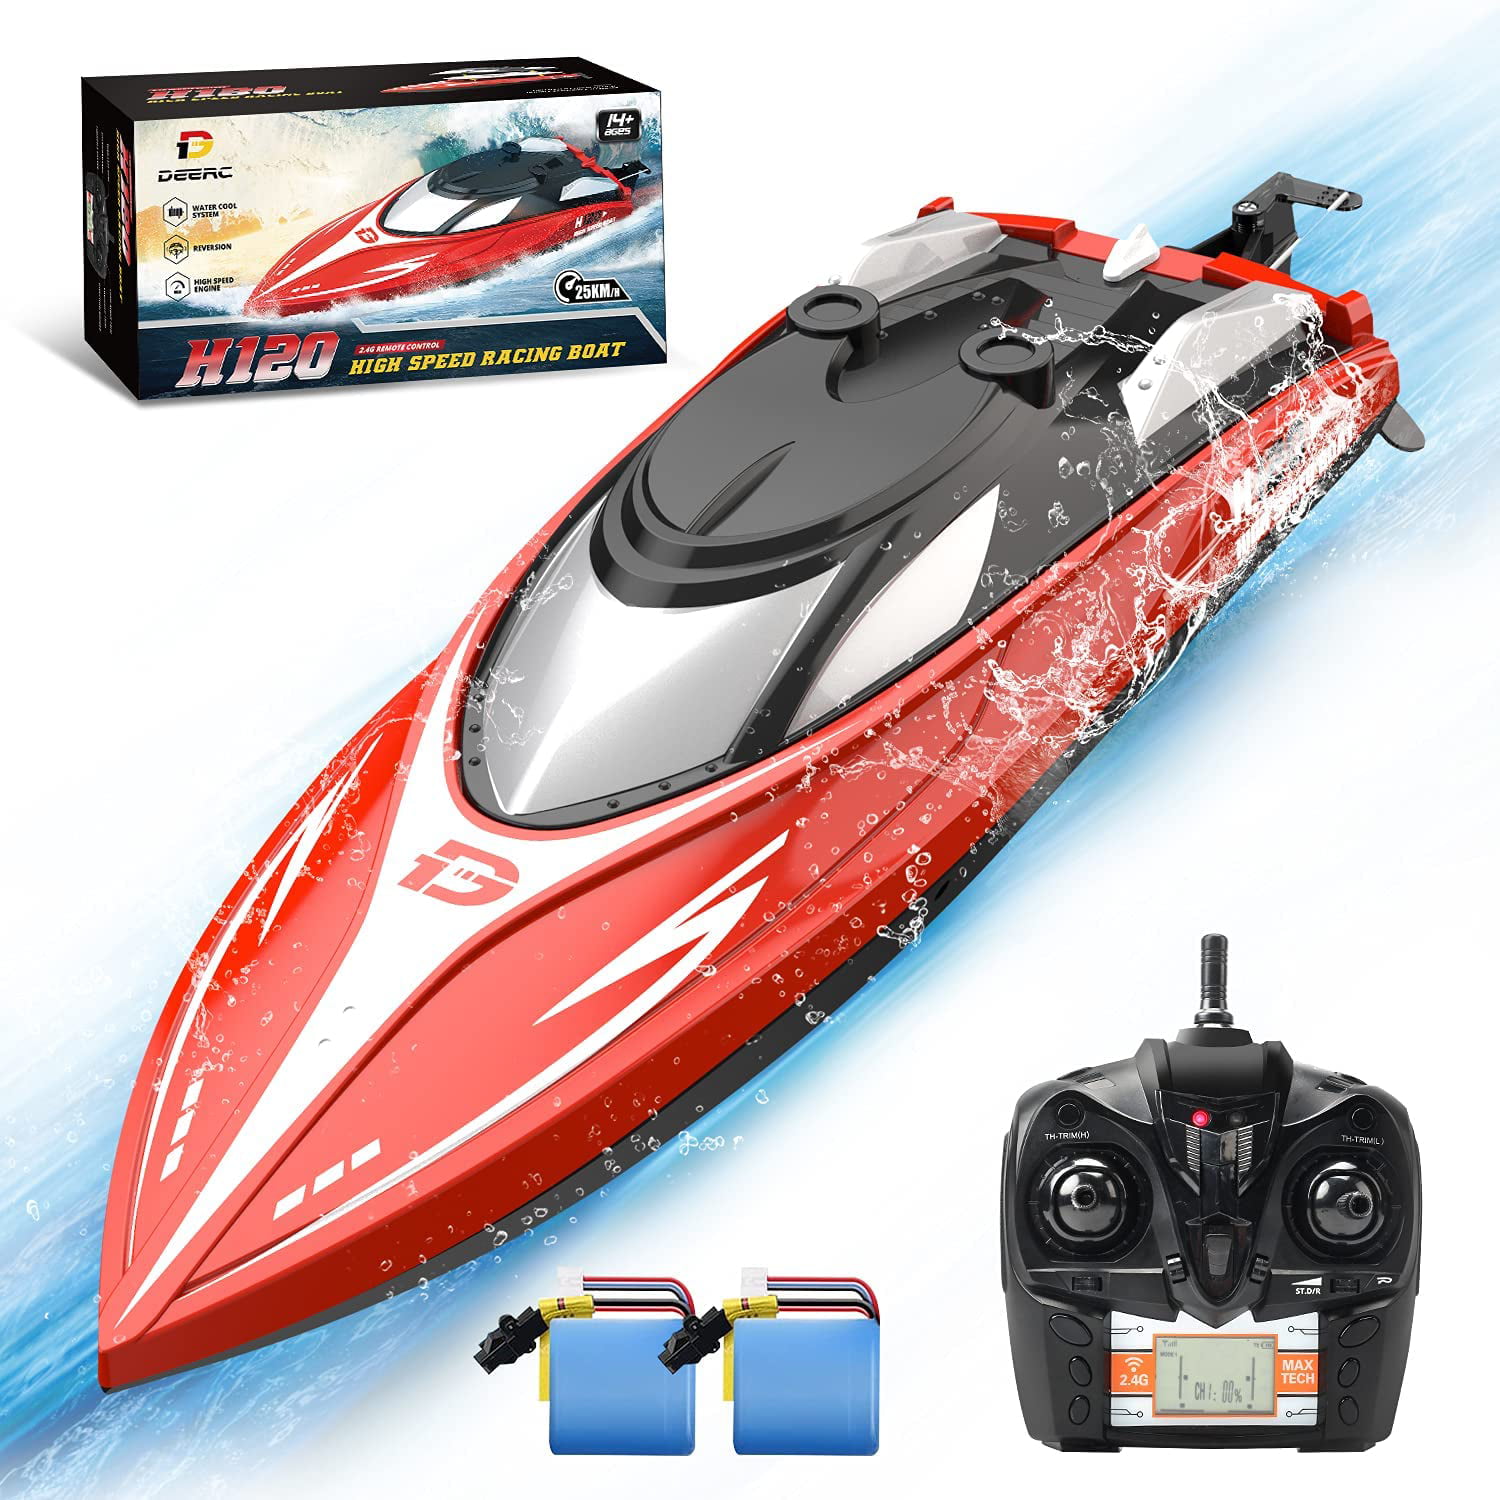 Self Righting High Speed Boat Toys for Boys or Girls Remote Control Boats for Pools and Lakes H102 Remote Controlled RC Boats for Kids or Adults